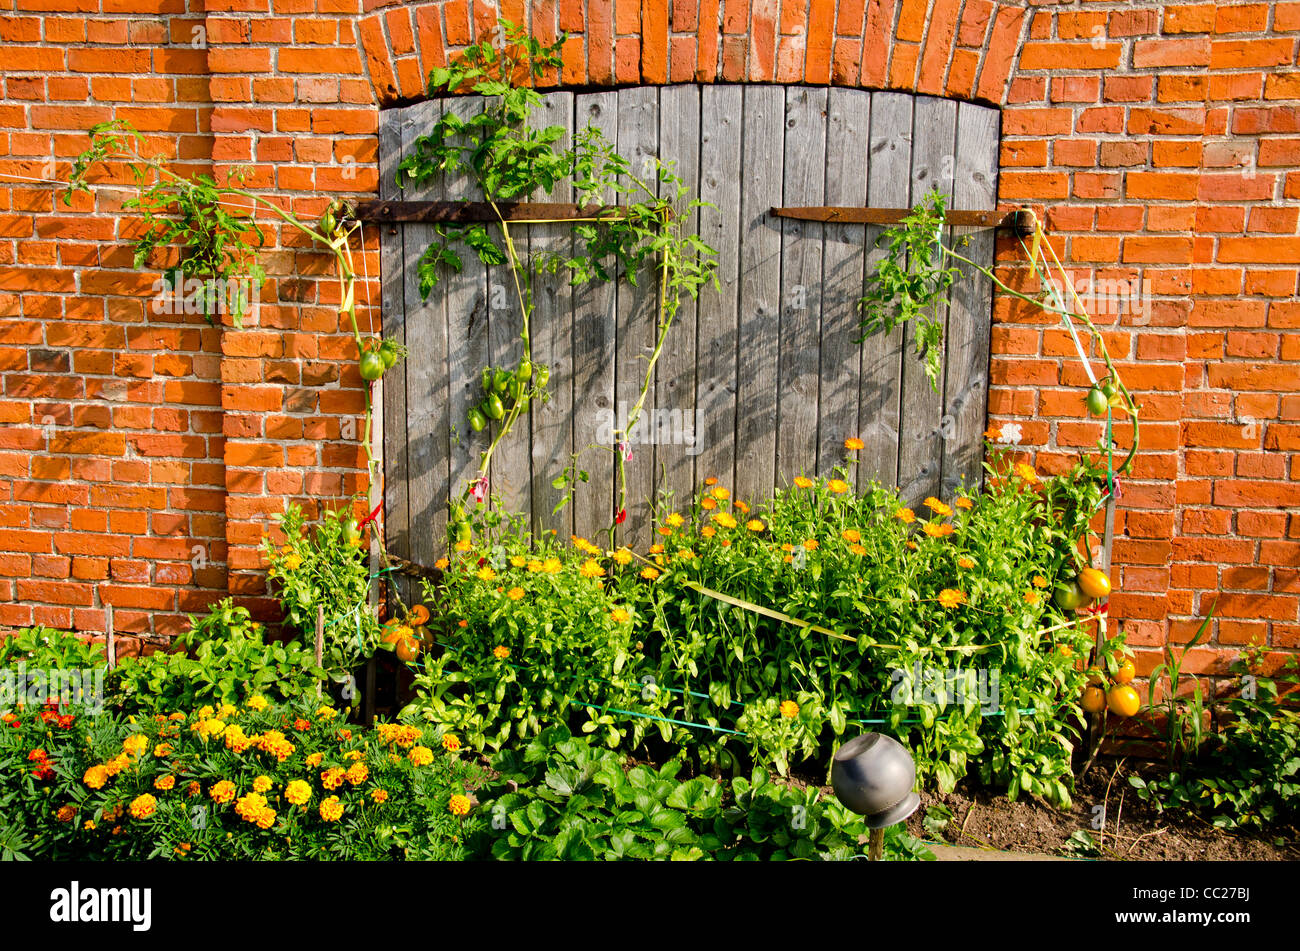 Abandoned building wall and wooden doors, tomato and flowers growing. Garden details. Stock Photo